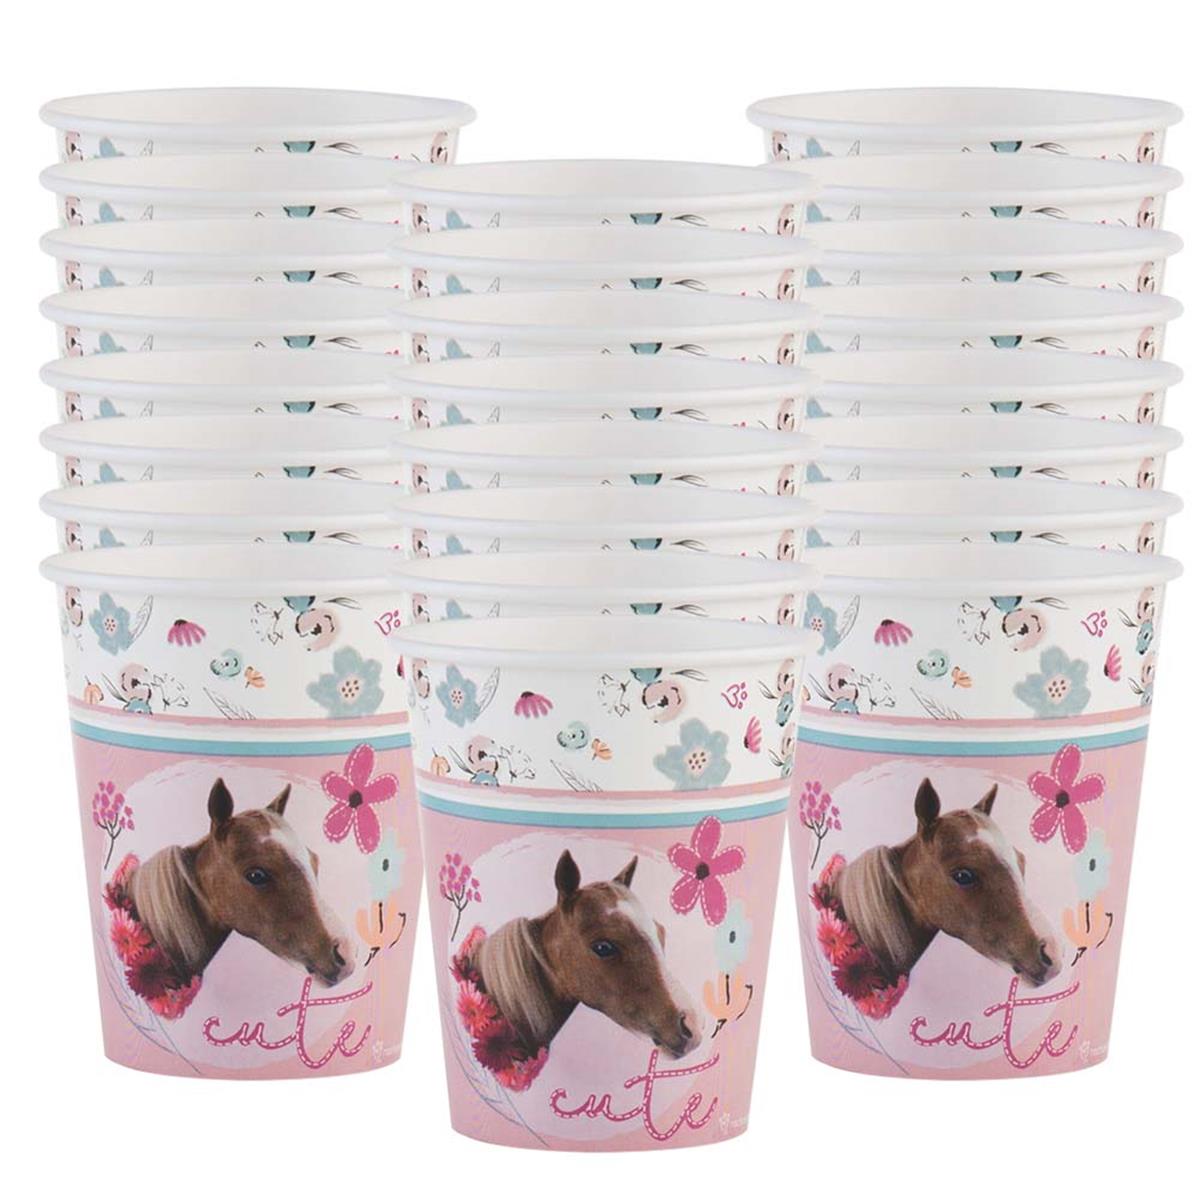 Picture of Birthday Express 305037 9 oz Rachael Hale Beautiful Horse Paper Cups - 24 Piece